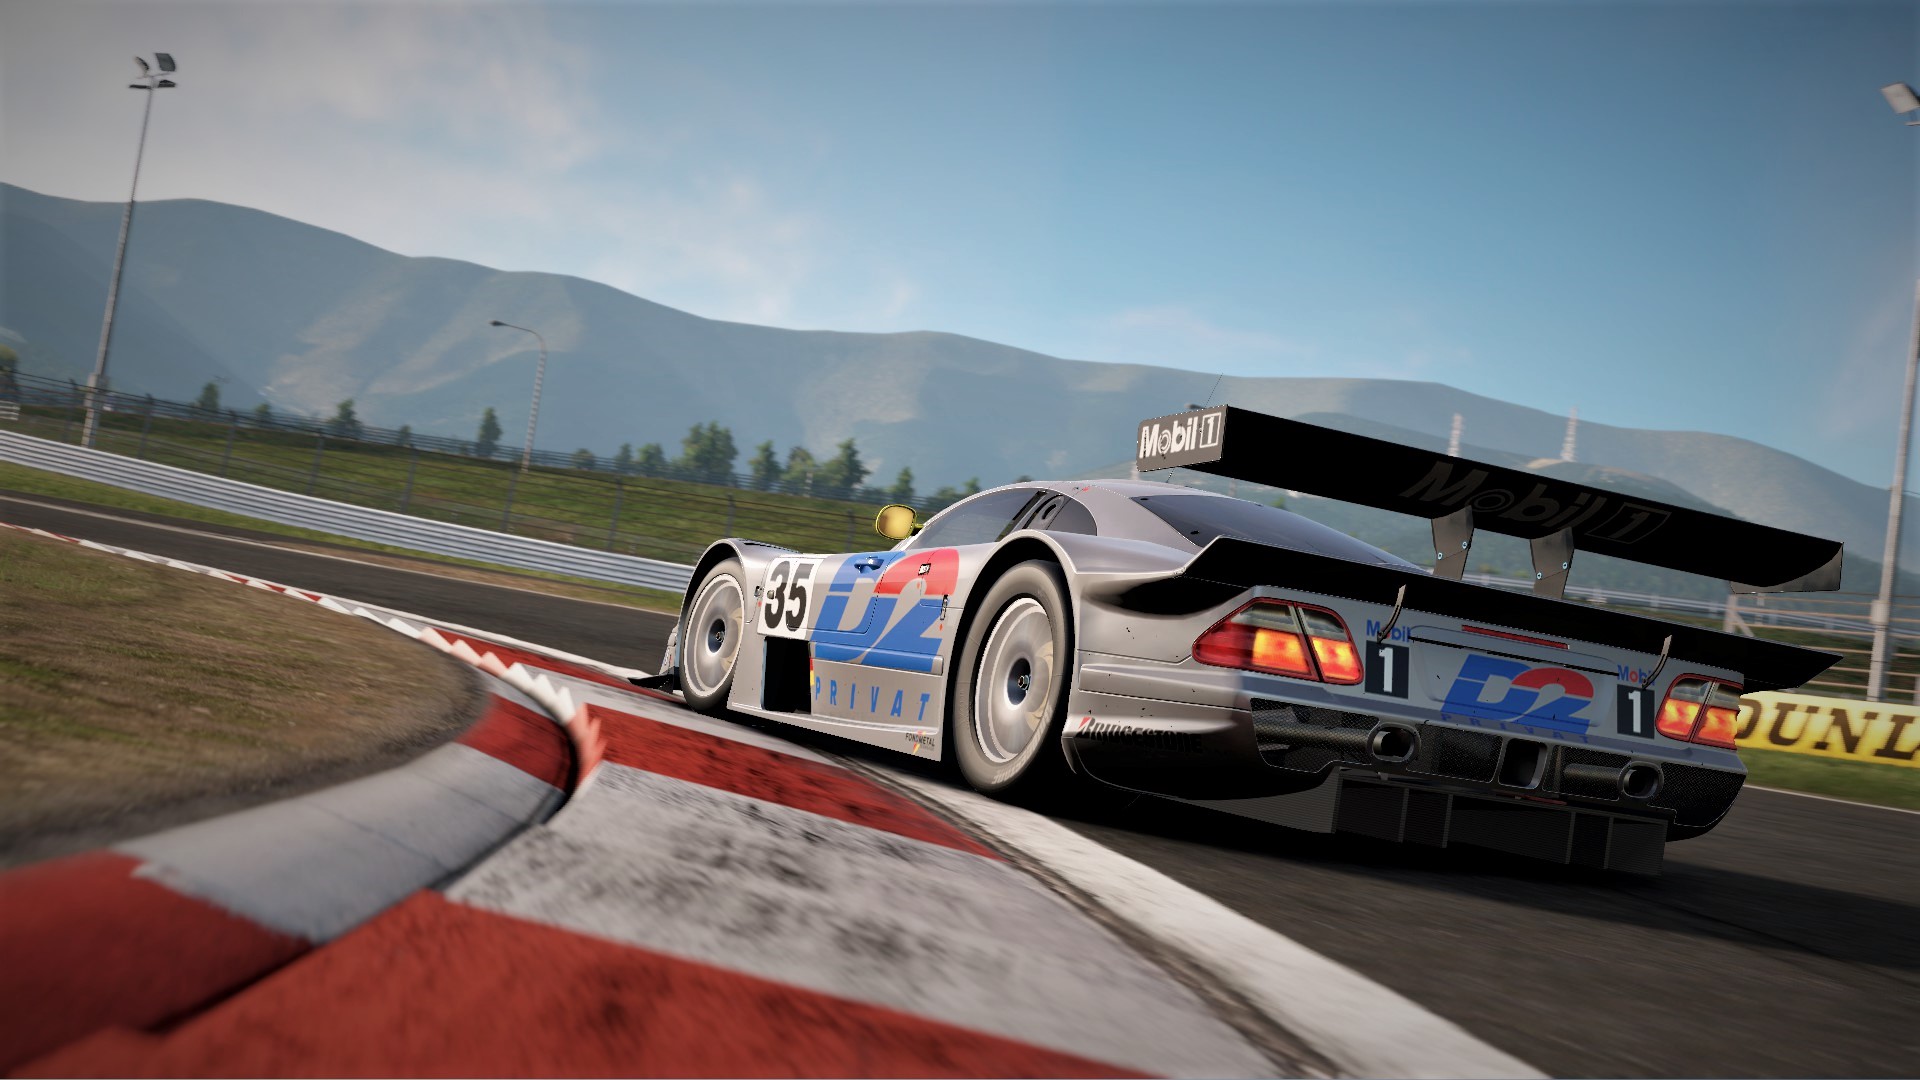 free download project cars 2 steam